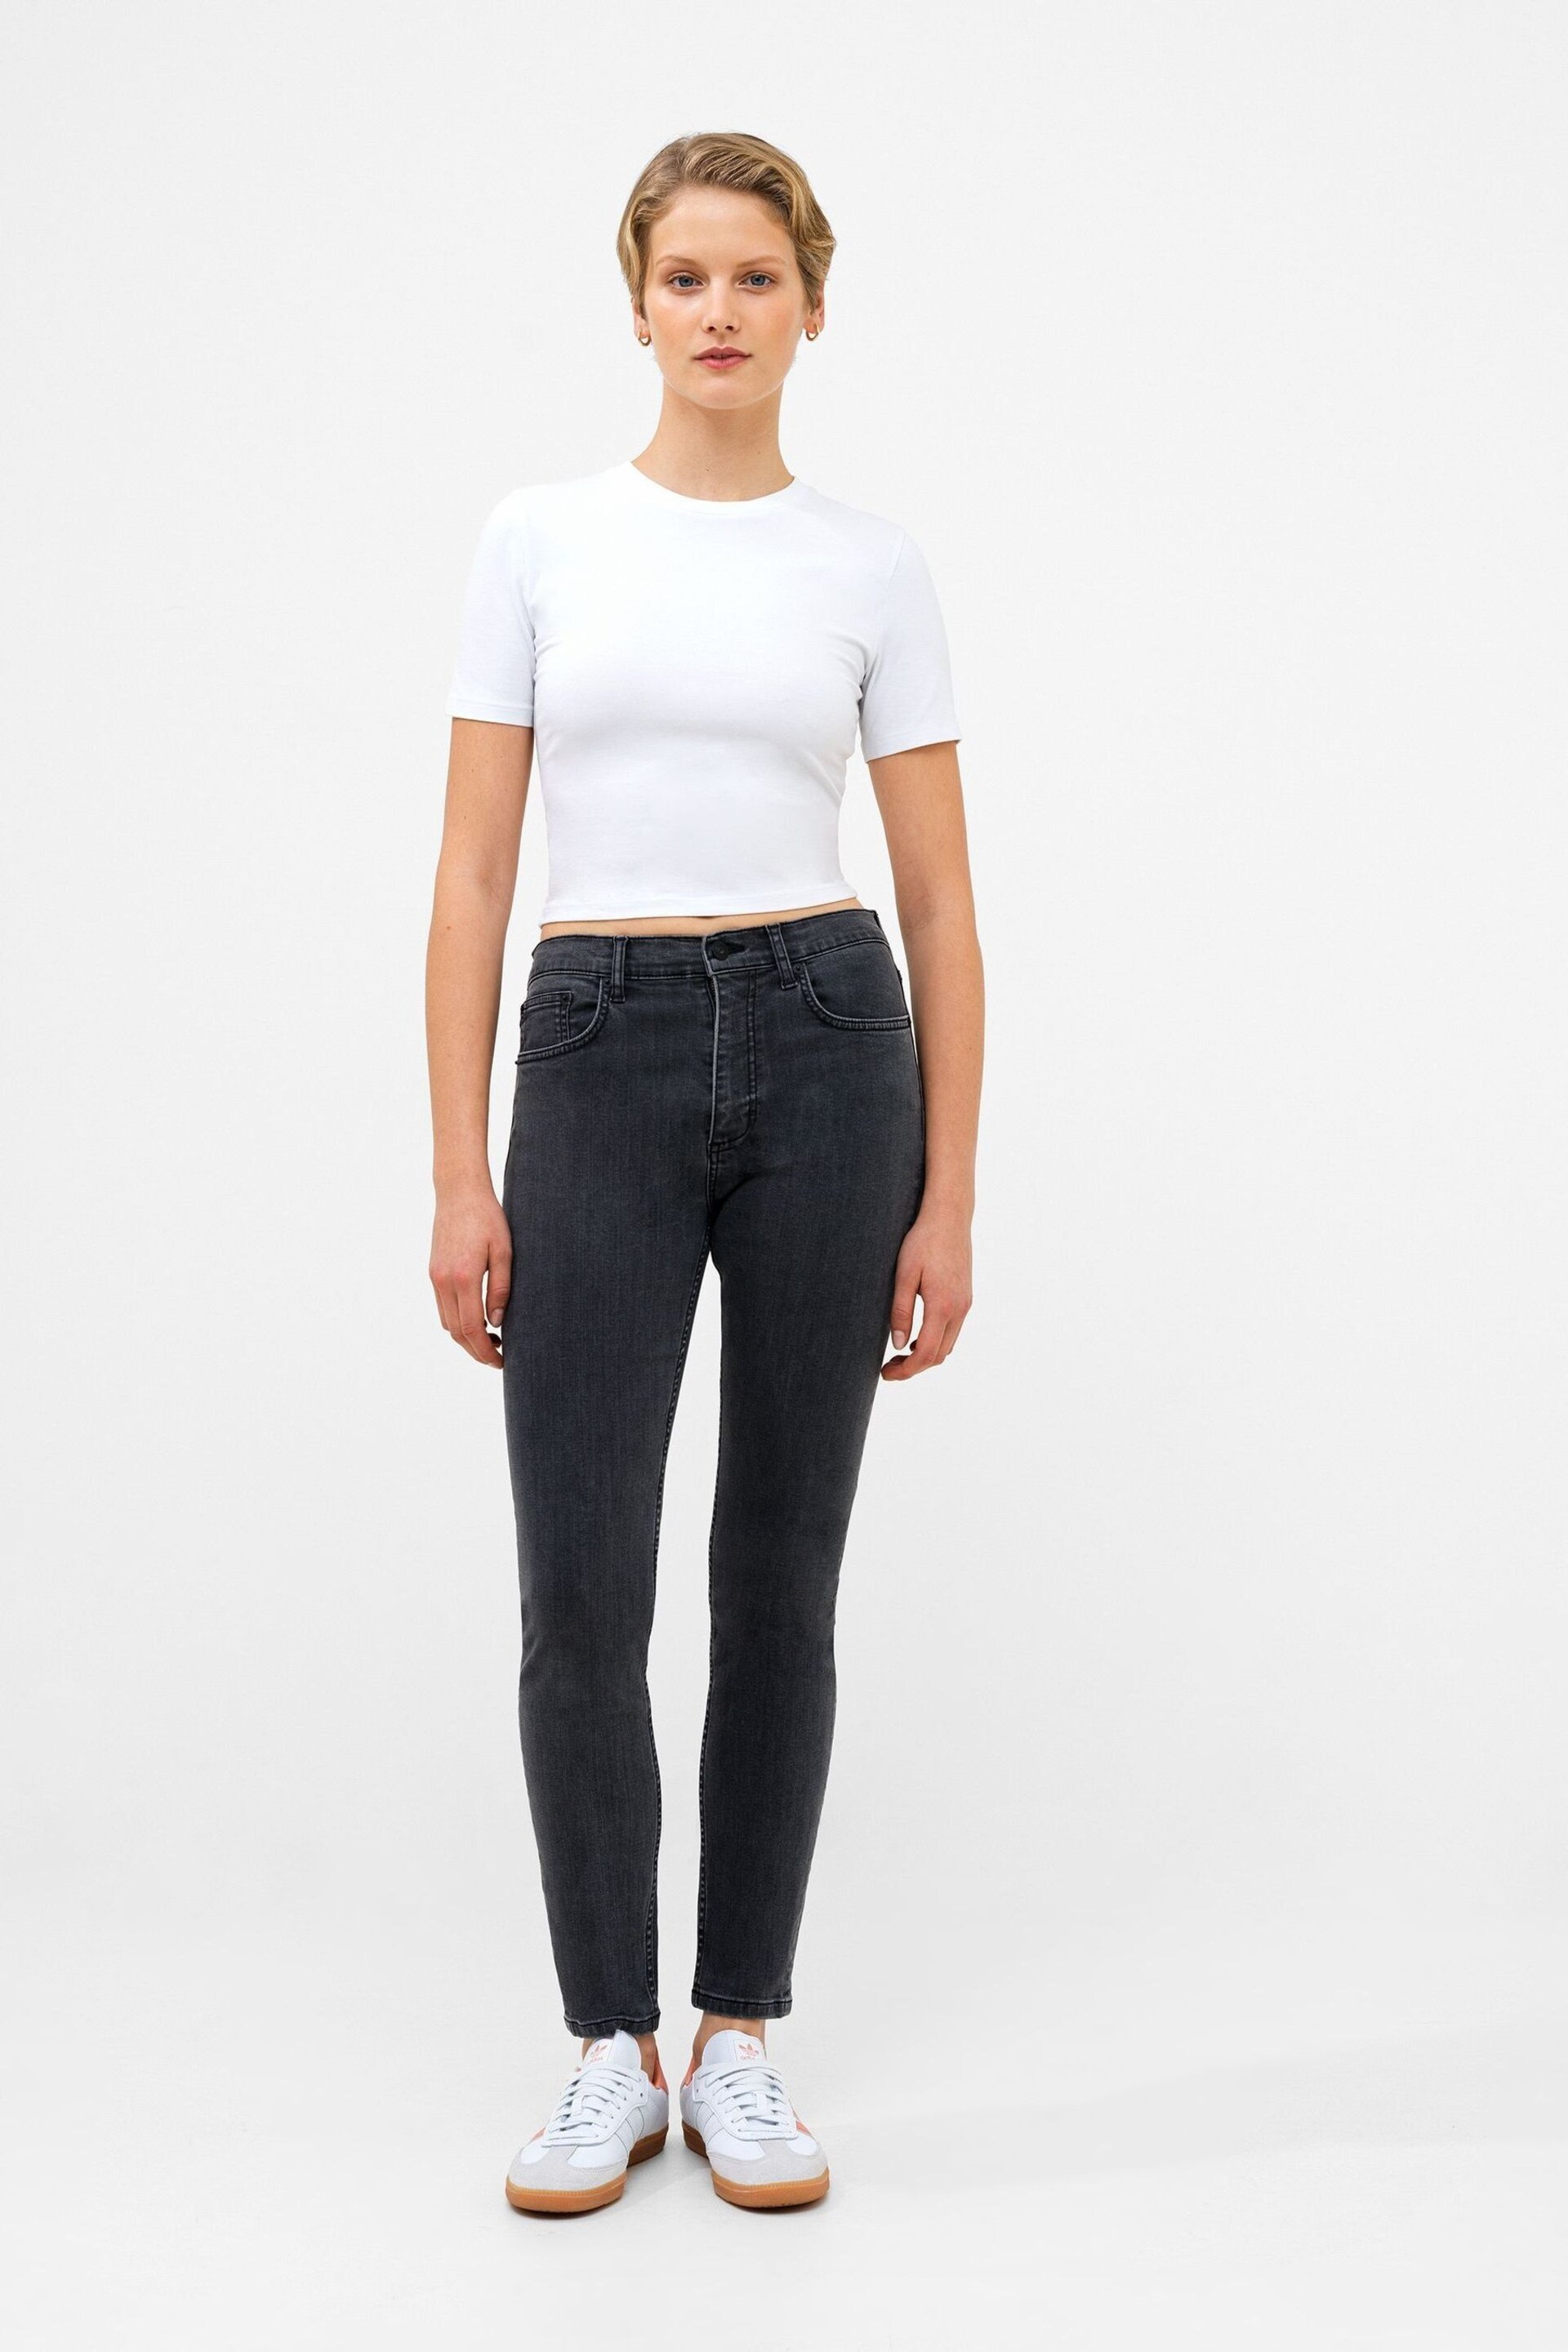 French Connection Soft Stretch Skinny High Rise Jeans - Image 3 of 3